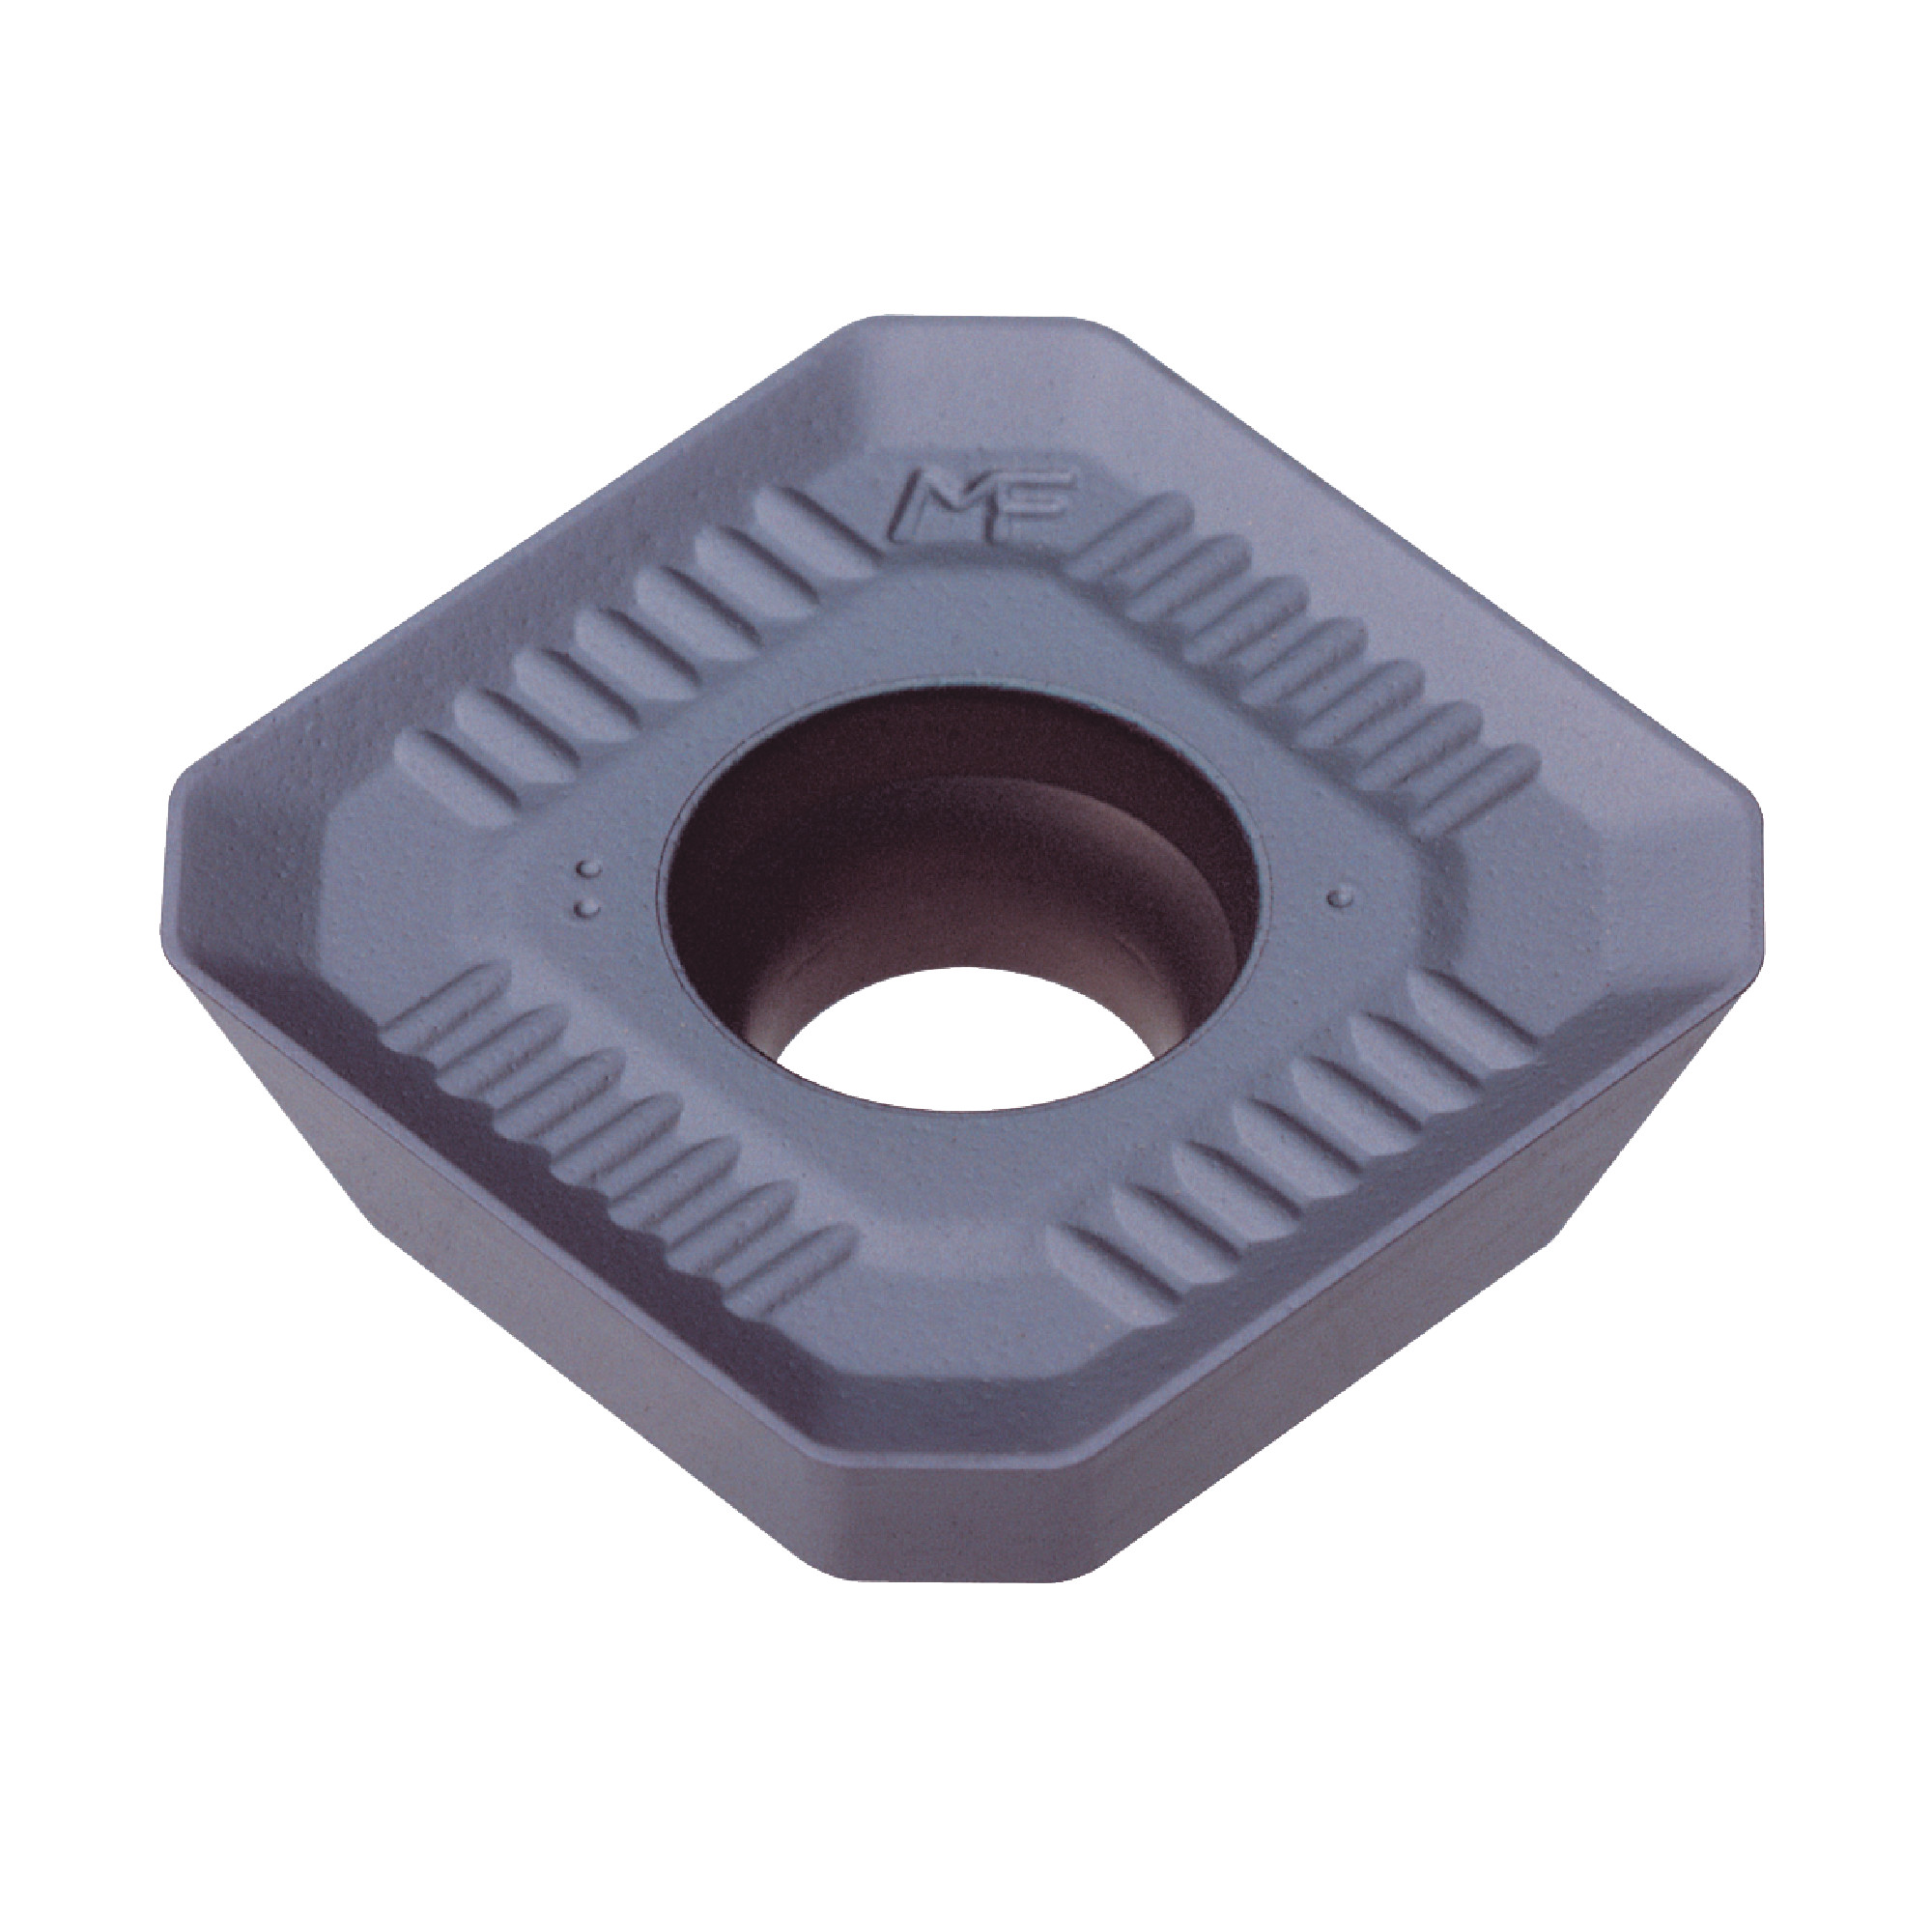 KORLOY - SEXT14M4AGSN-MF PC5300 Square / INDEXABLE Carbide MILLING INSERT